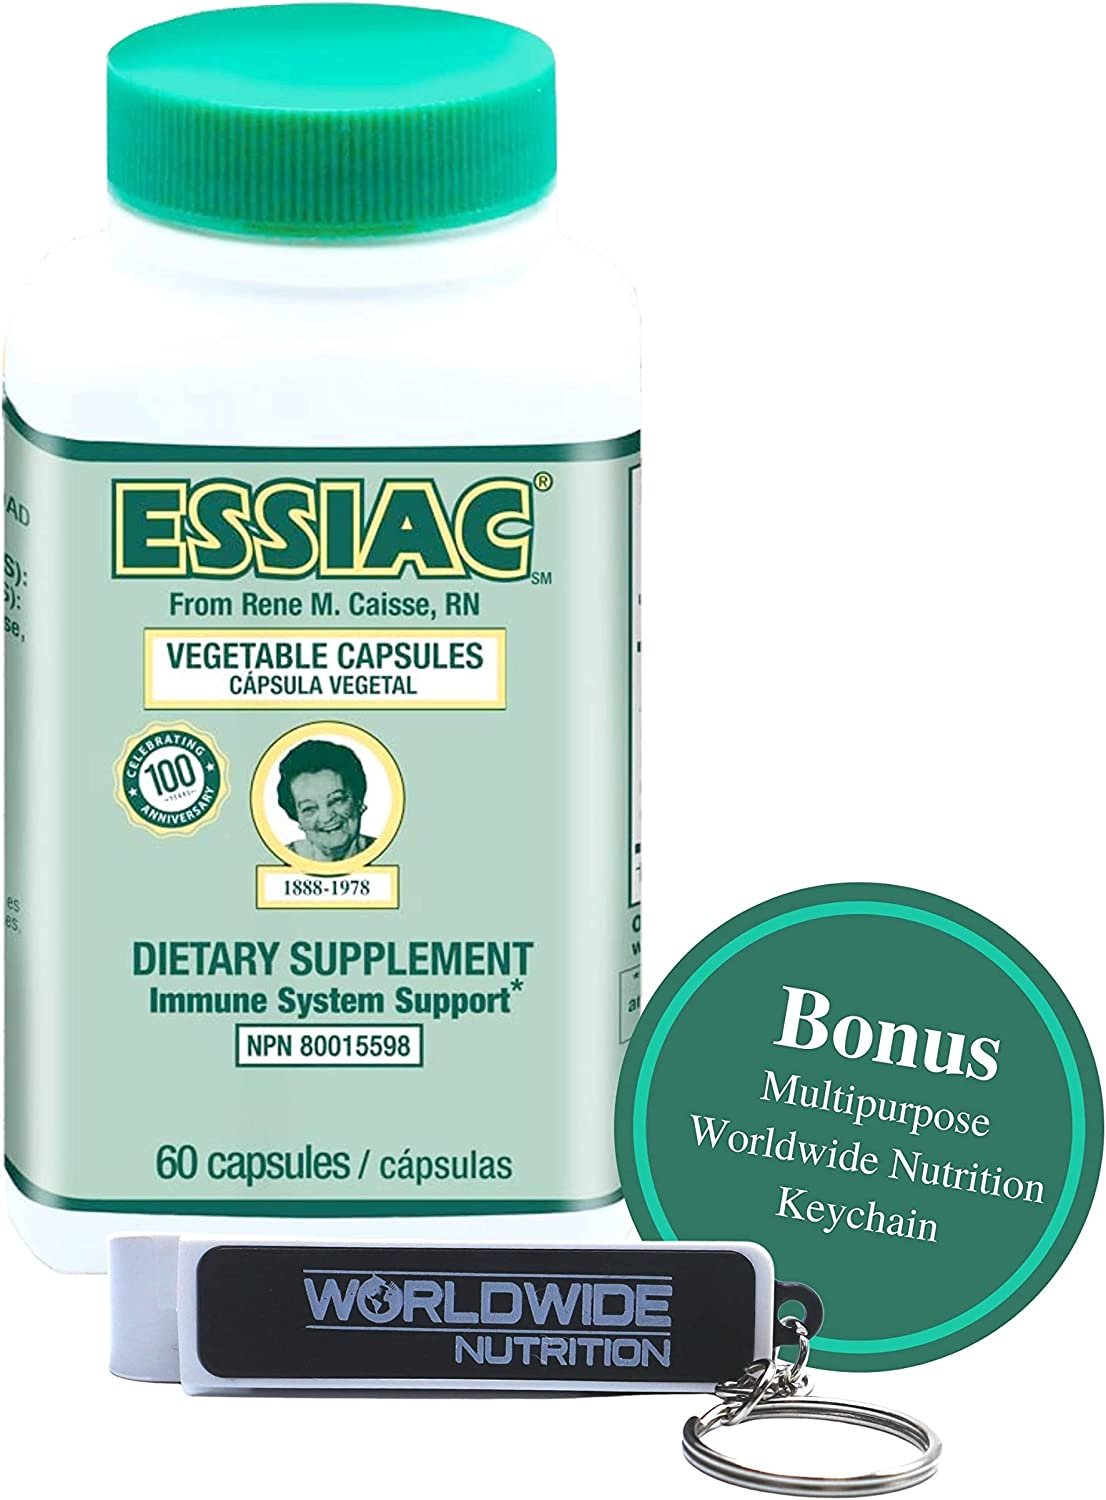 Worldwide Nutrition ESSIAC All-Natural Herbal Extract Capsules | Powerful Antioxidant Blend to Help Promote Overall Health & Well-Being | Original Formula Since 1922-60 Capsules Key Chain